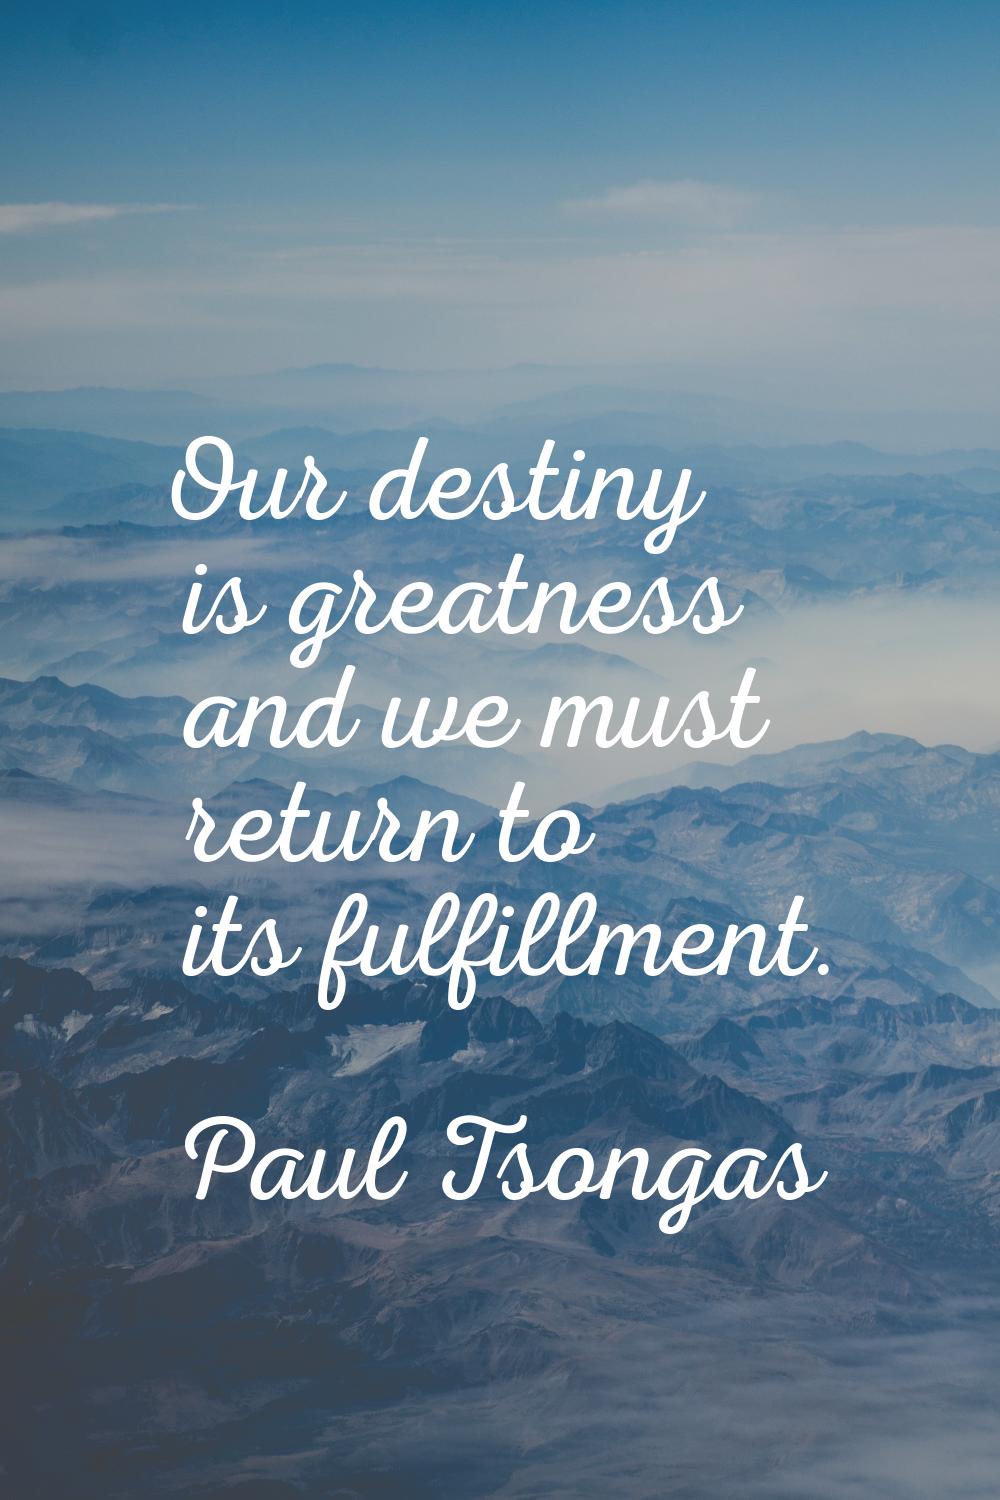 Our destiny is greatness and we must return to its fulfillment.